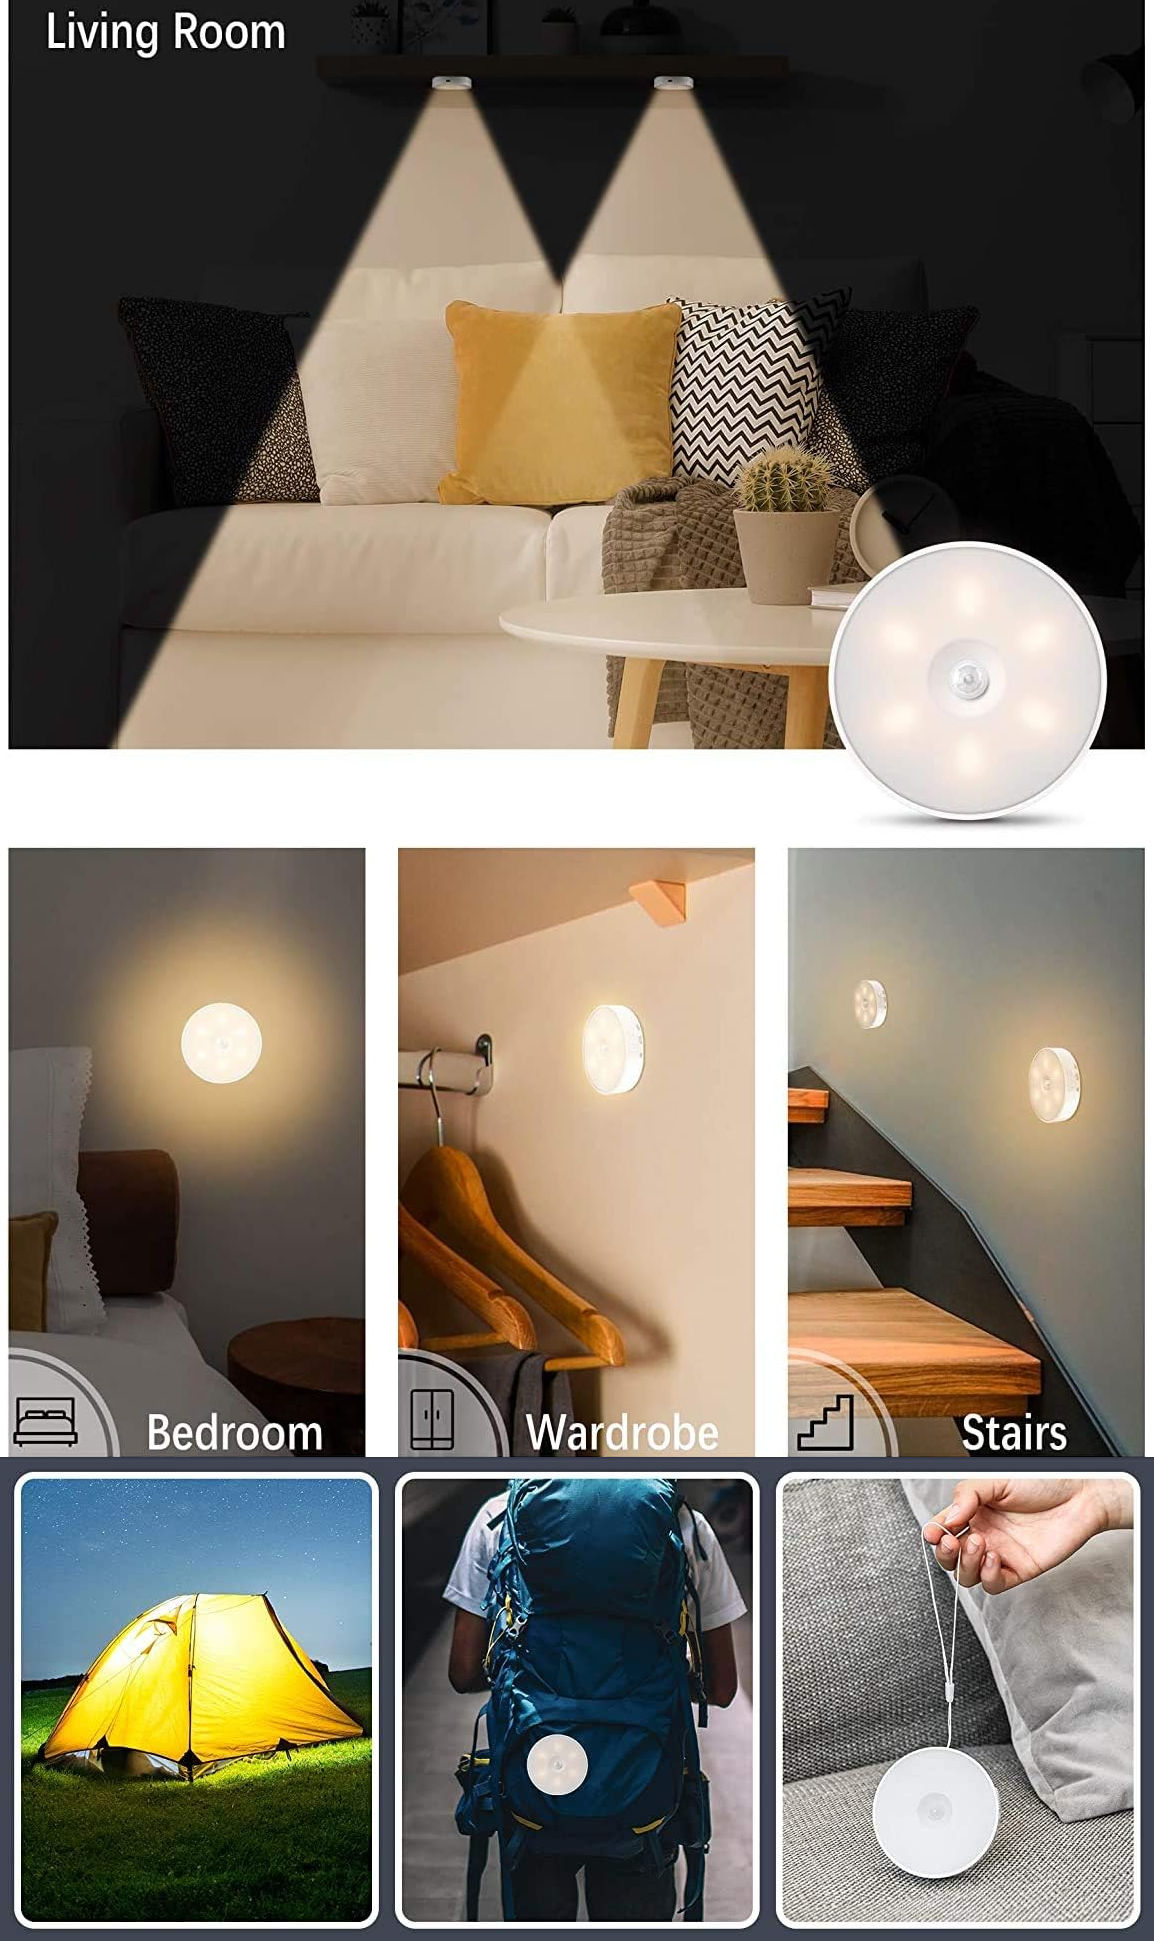 LED-Desk-Lights-Motion-Sensor-Light-Closet-Lights-Night-Light-Rechargeable-Cordless-Wall-Lights-Magnetic-attraction-Stick-on-anywhere-Automatically-turn-on-off-70